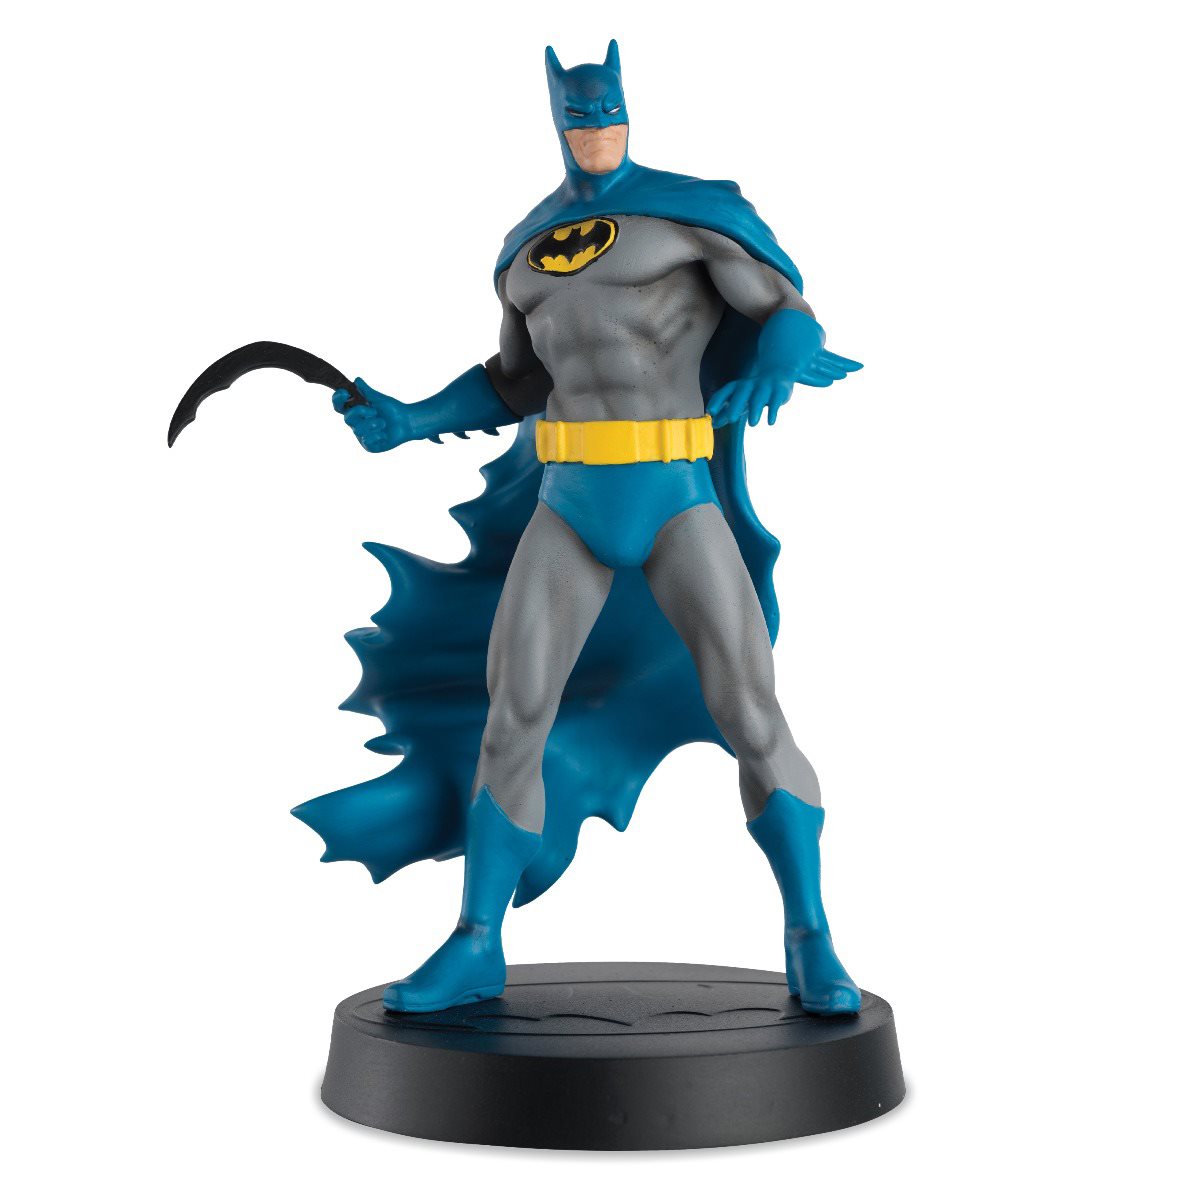 Batman 1980s Decades Collection Figure with Collector Magazine